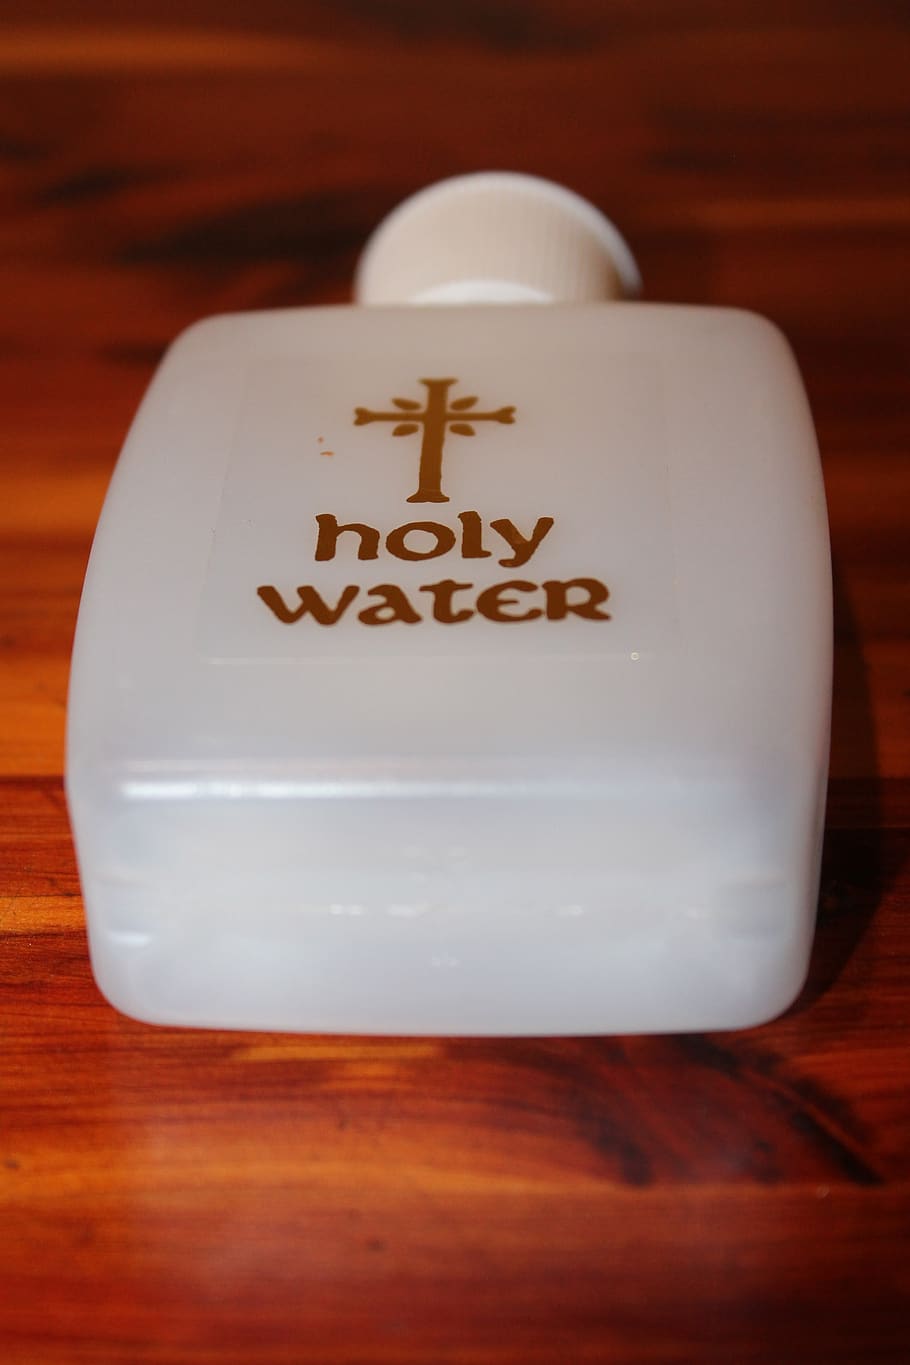 holy water, catholic water, church, religious, religious blessing, house blessing, priest blessing, consecrated water, exorcism, house cleanse